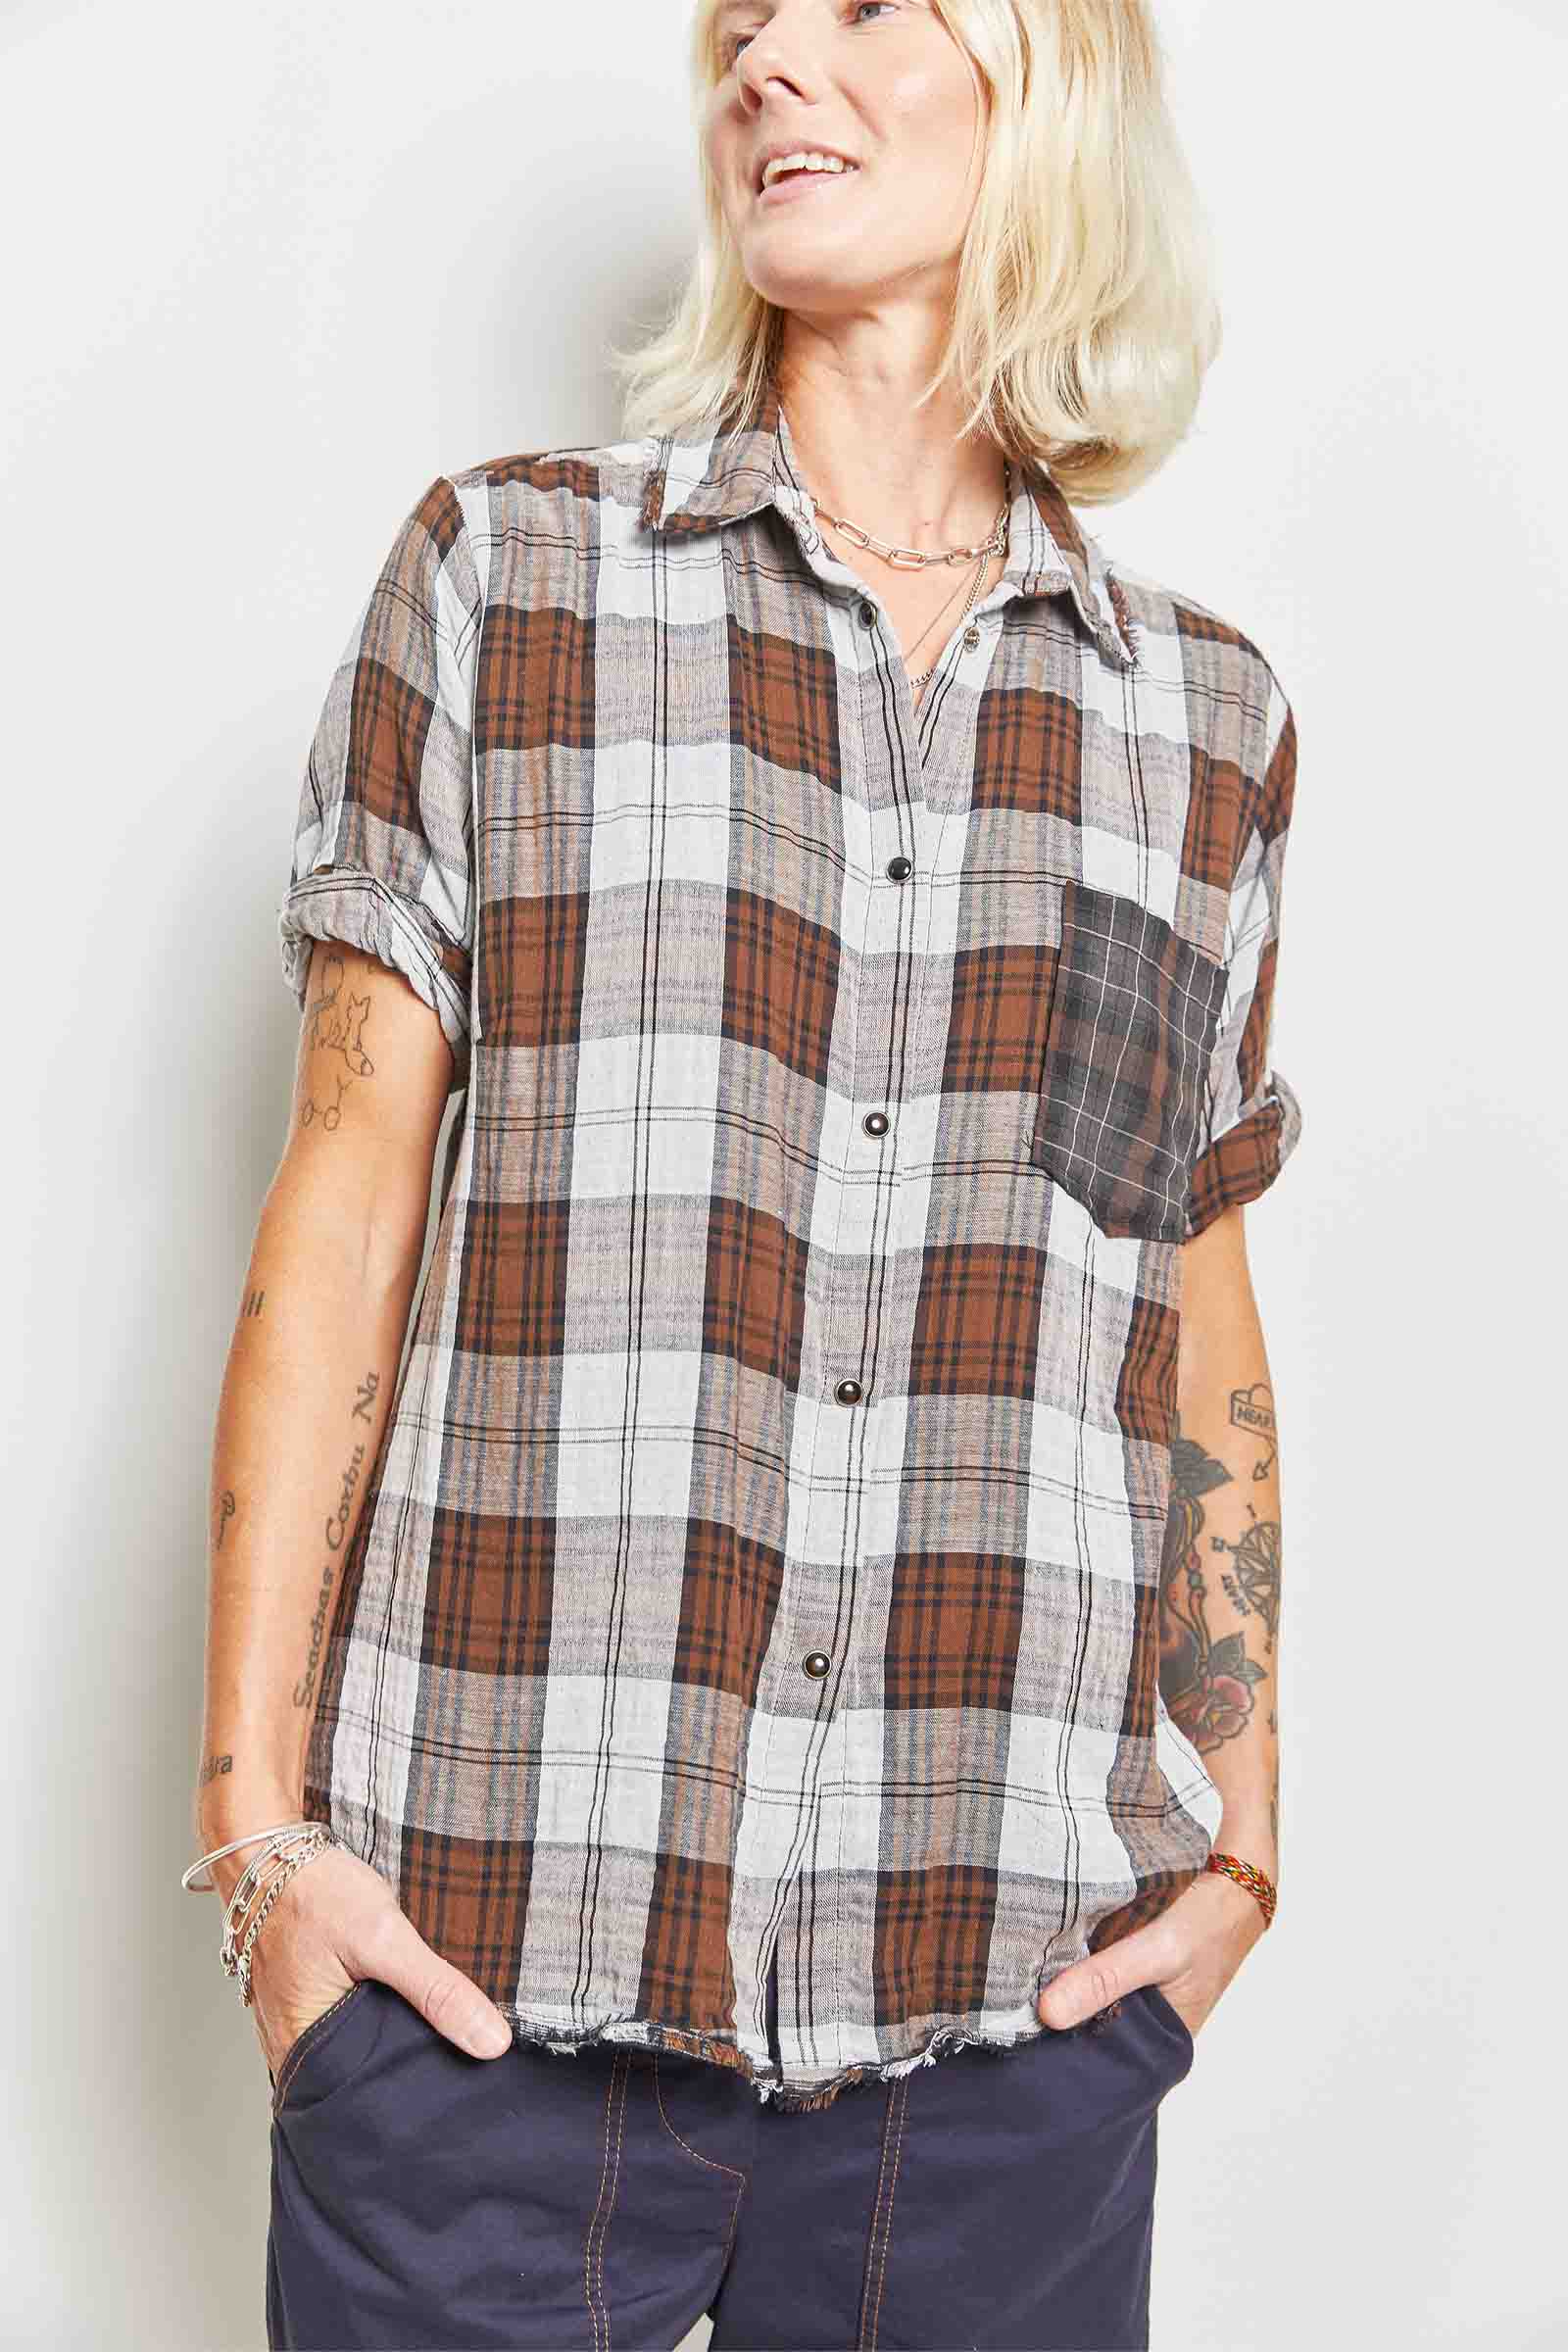 byfreer flannel cotton chocolate check band shirt.